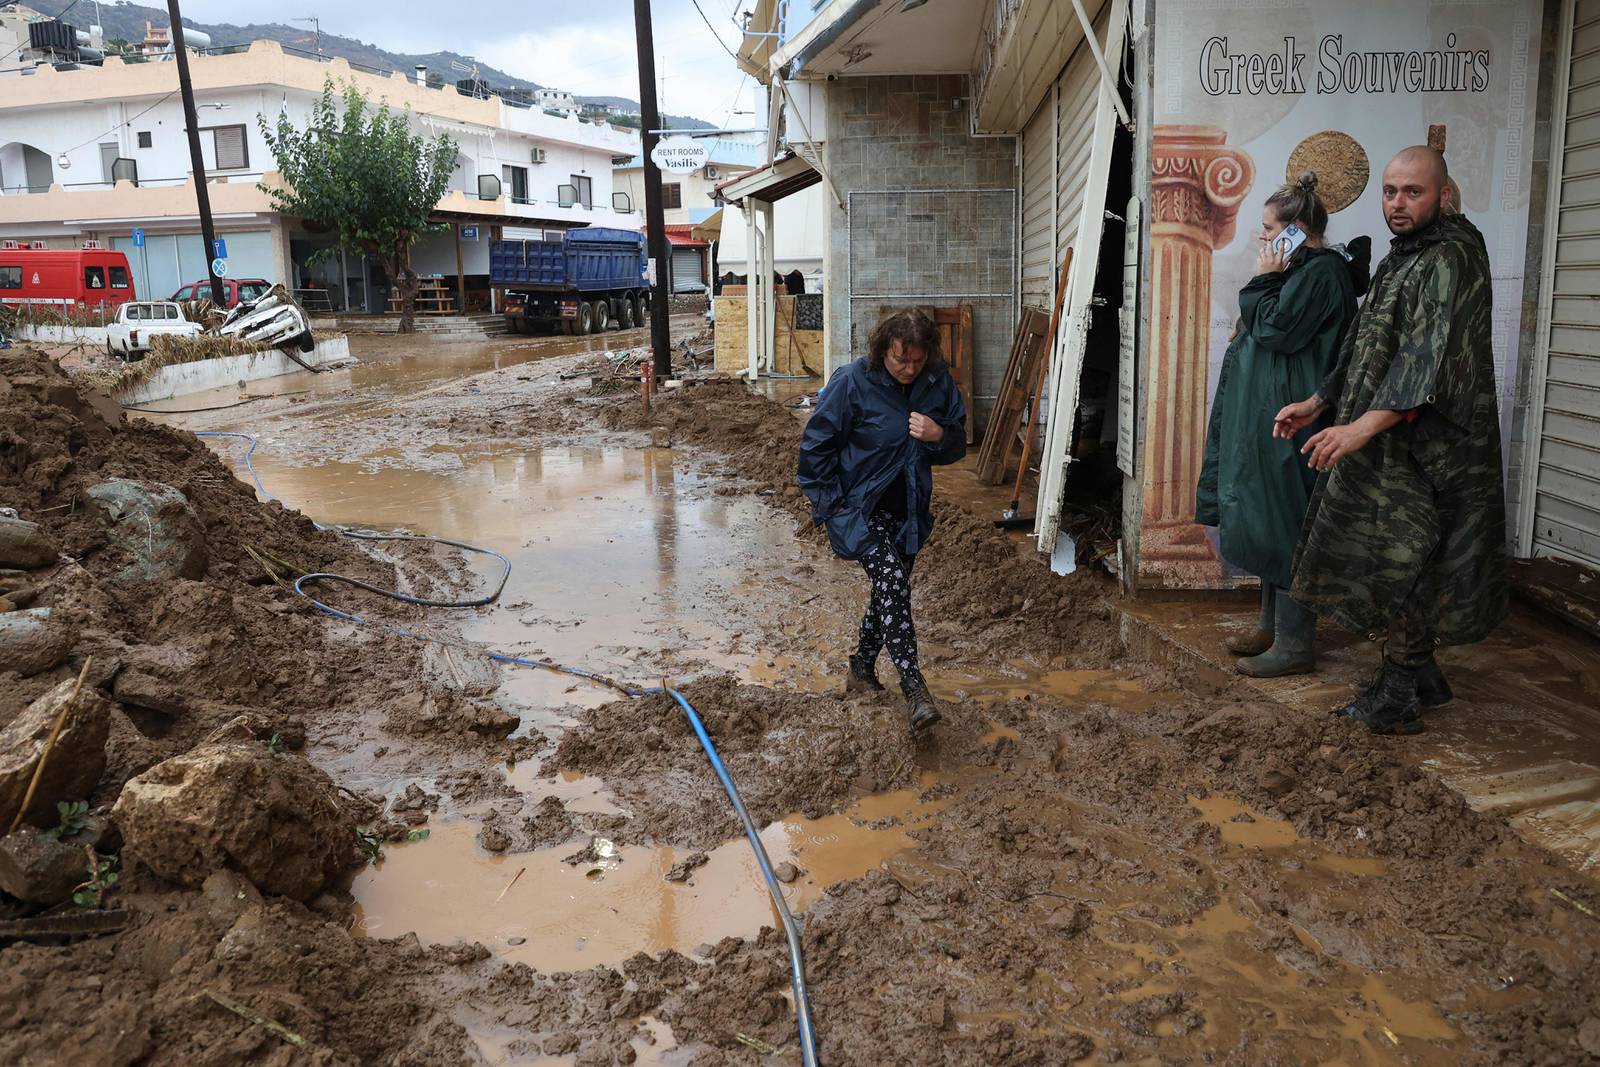 Two people die after flash floods in Crete as rescue teams continue ...